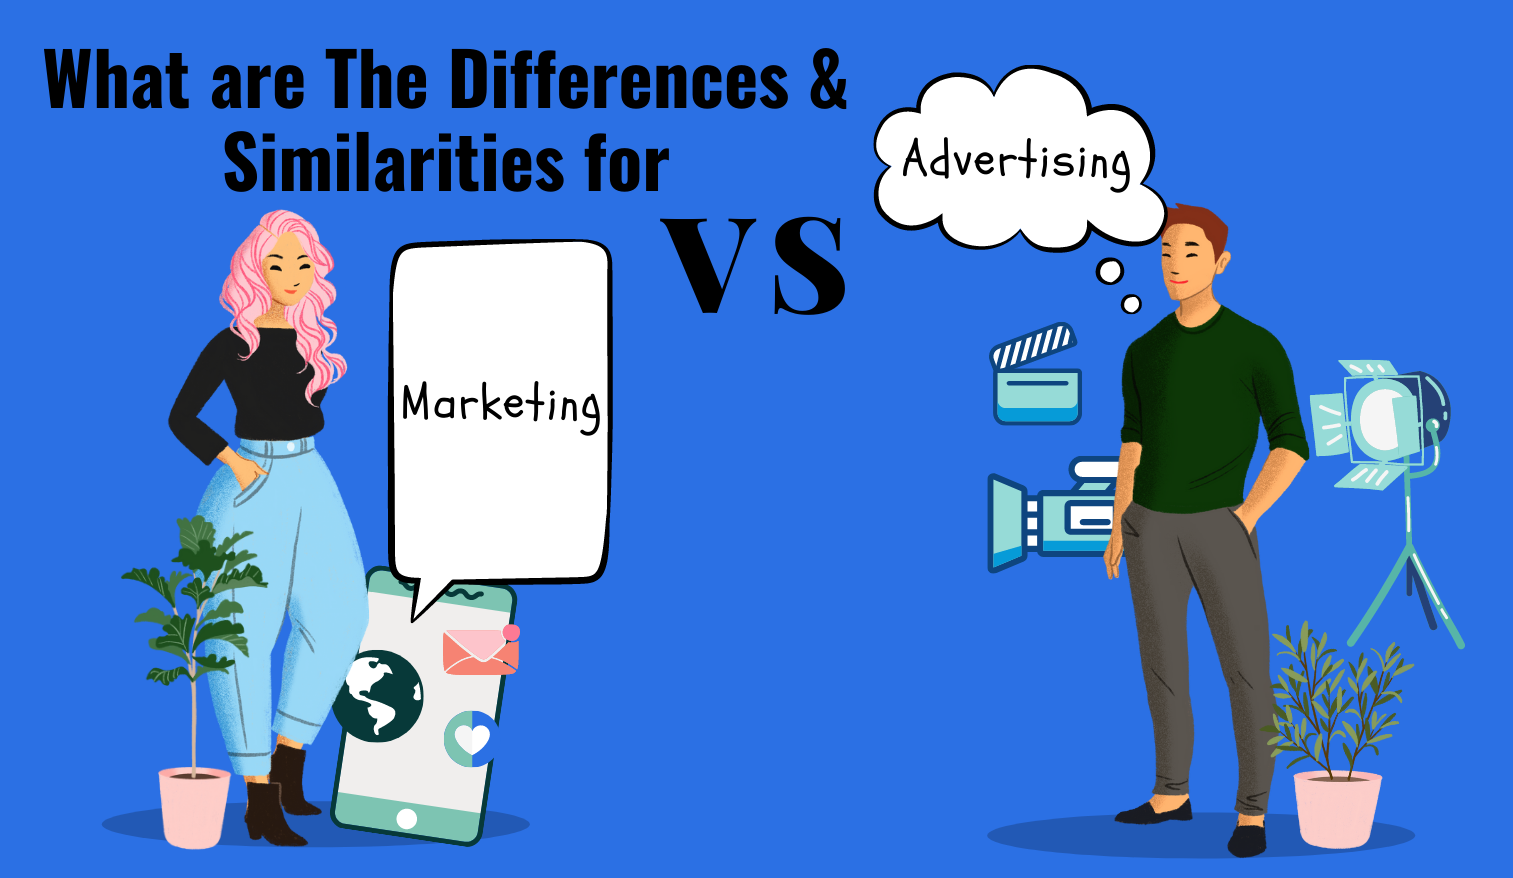 What are The Differences & Similarities for Marketing vs Advertising?